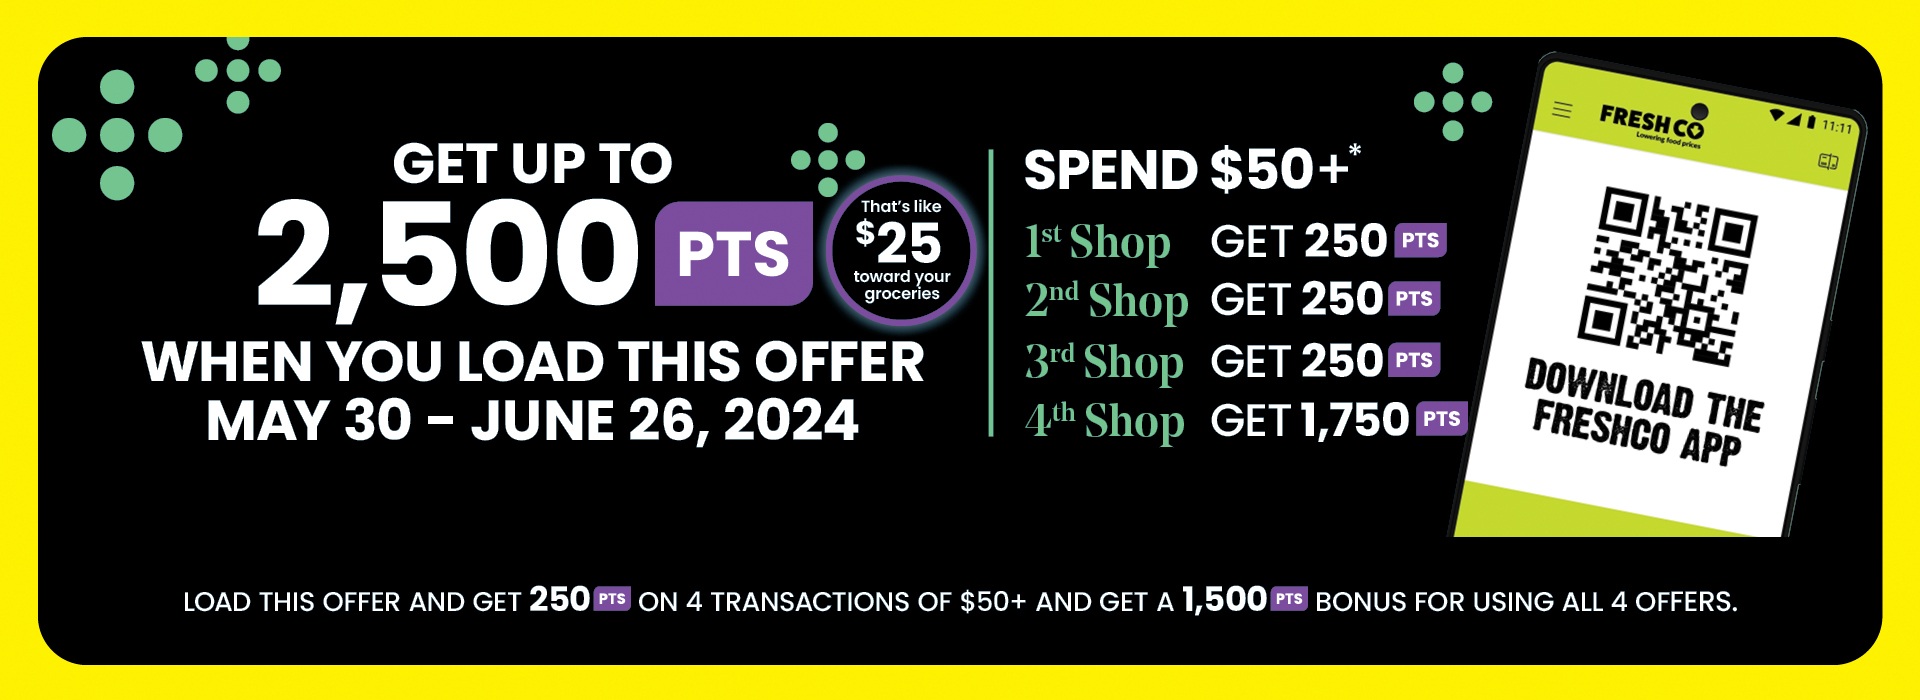 The following image contains the text, "Get up to 2,500 Points when you load this offer May 30 - June 26, 2024. Spend $50+*. 1st Shop Get 250 Points, 2nd Shop Get 250 Points, 3rd Shop Get 250 Points, 4th Shop Get 1,750 Points. That's like $25 toward your groceries."